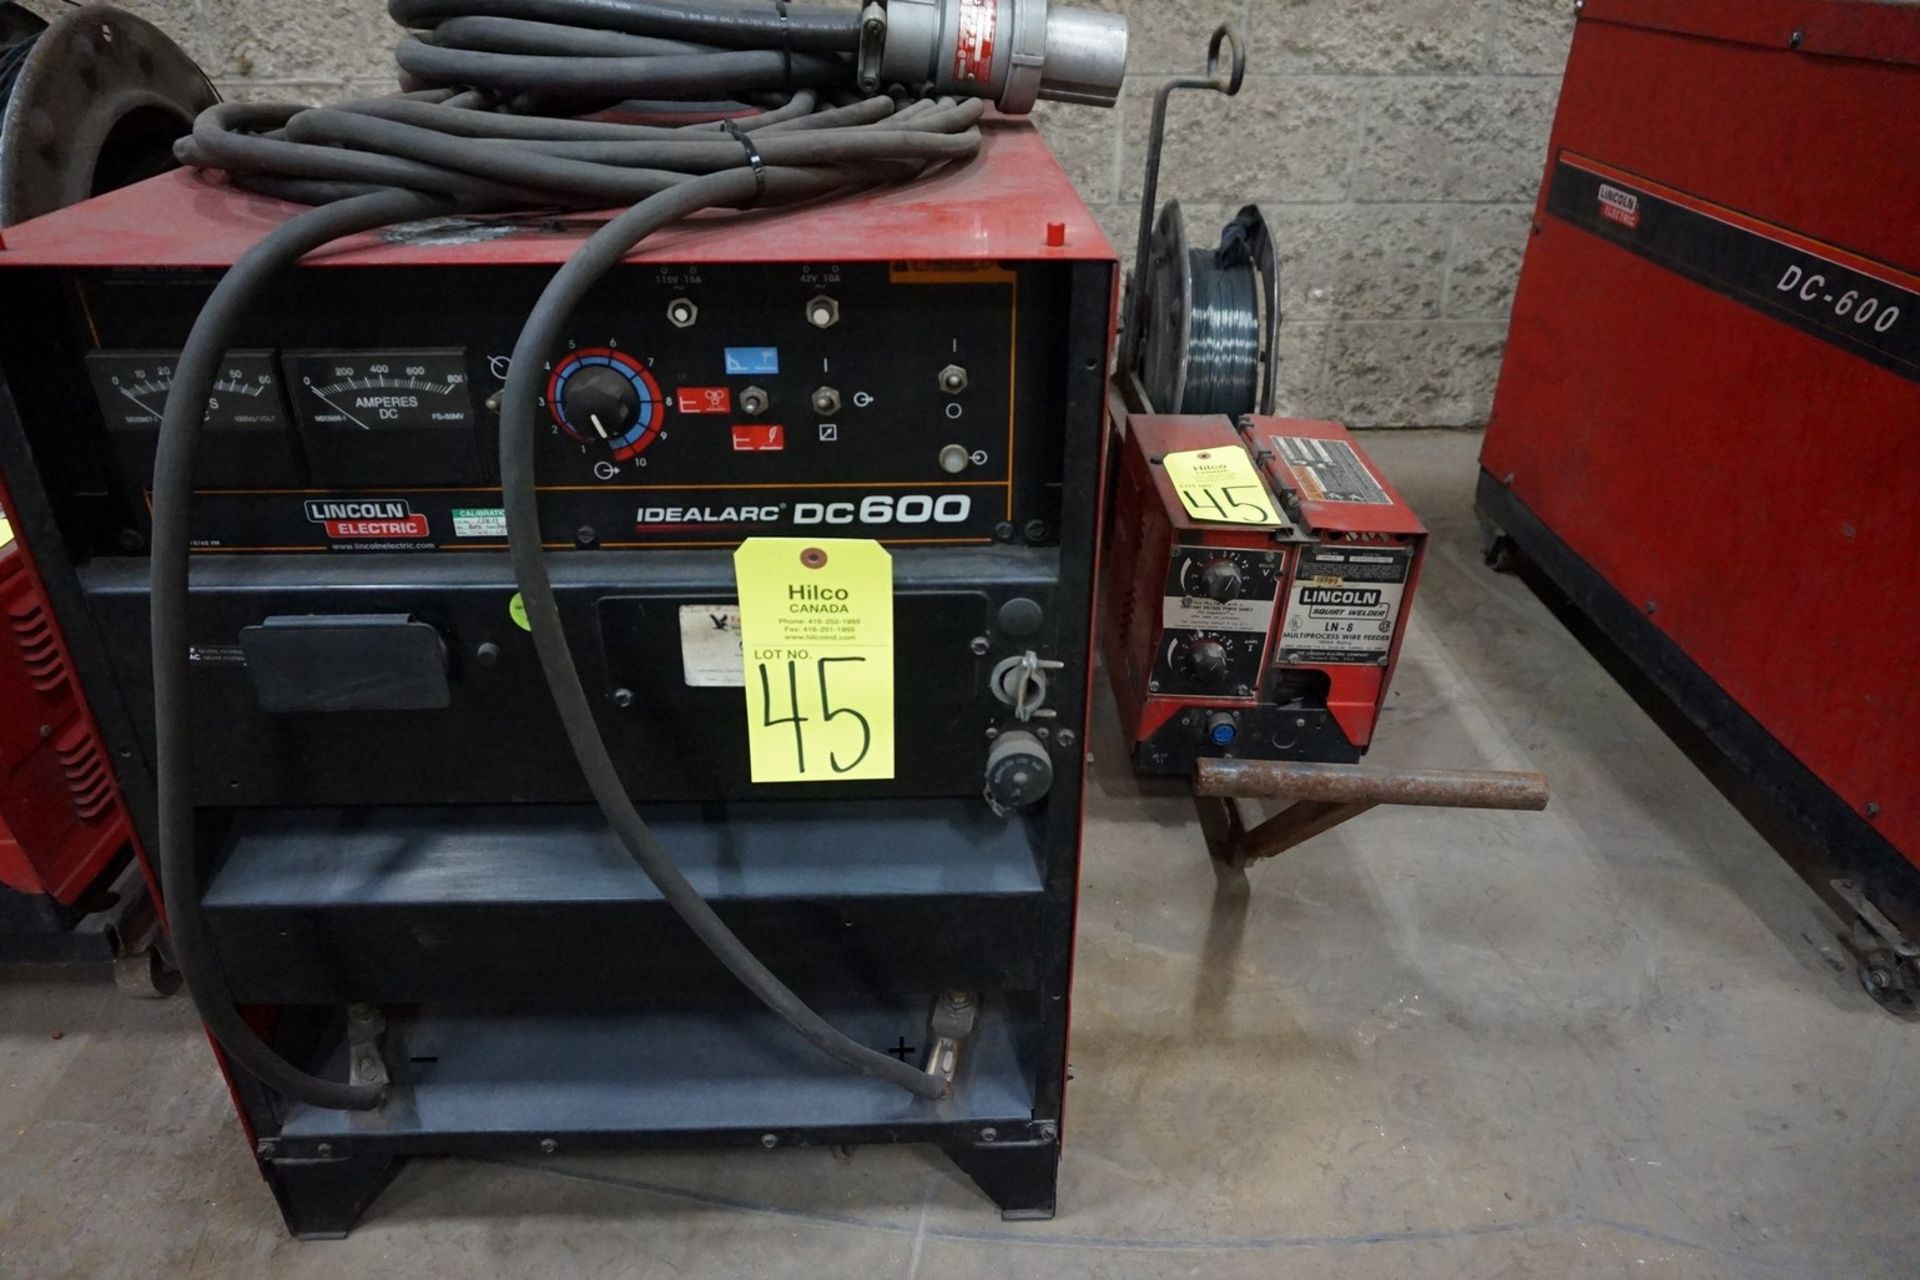 Lincoln Model Ideal Arc DC600 Welding Power Source